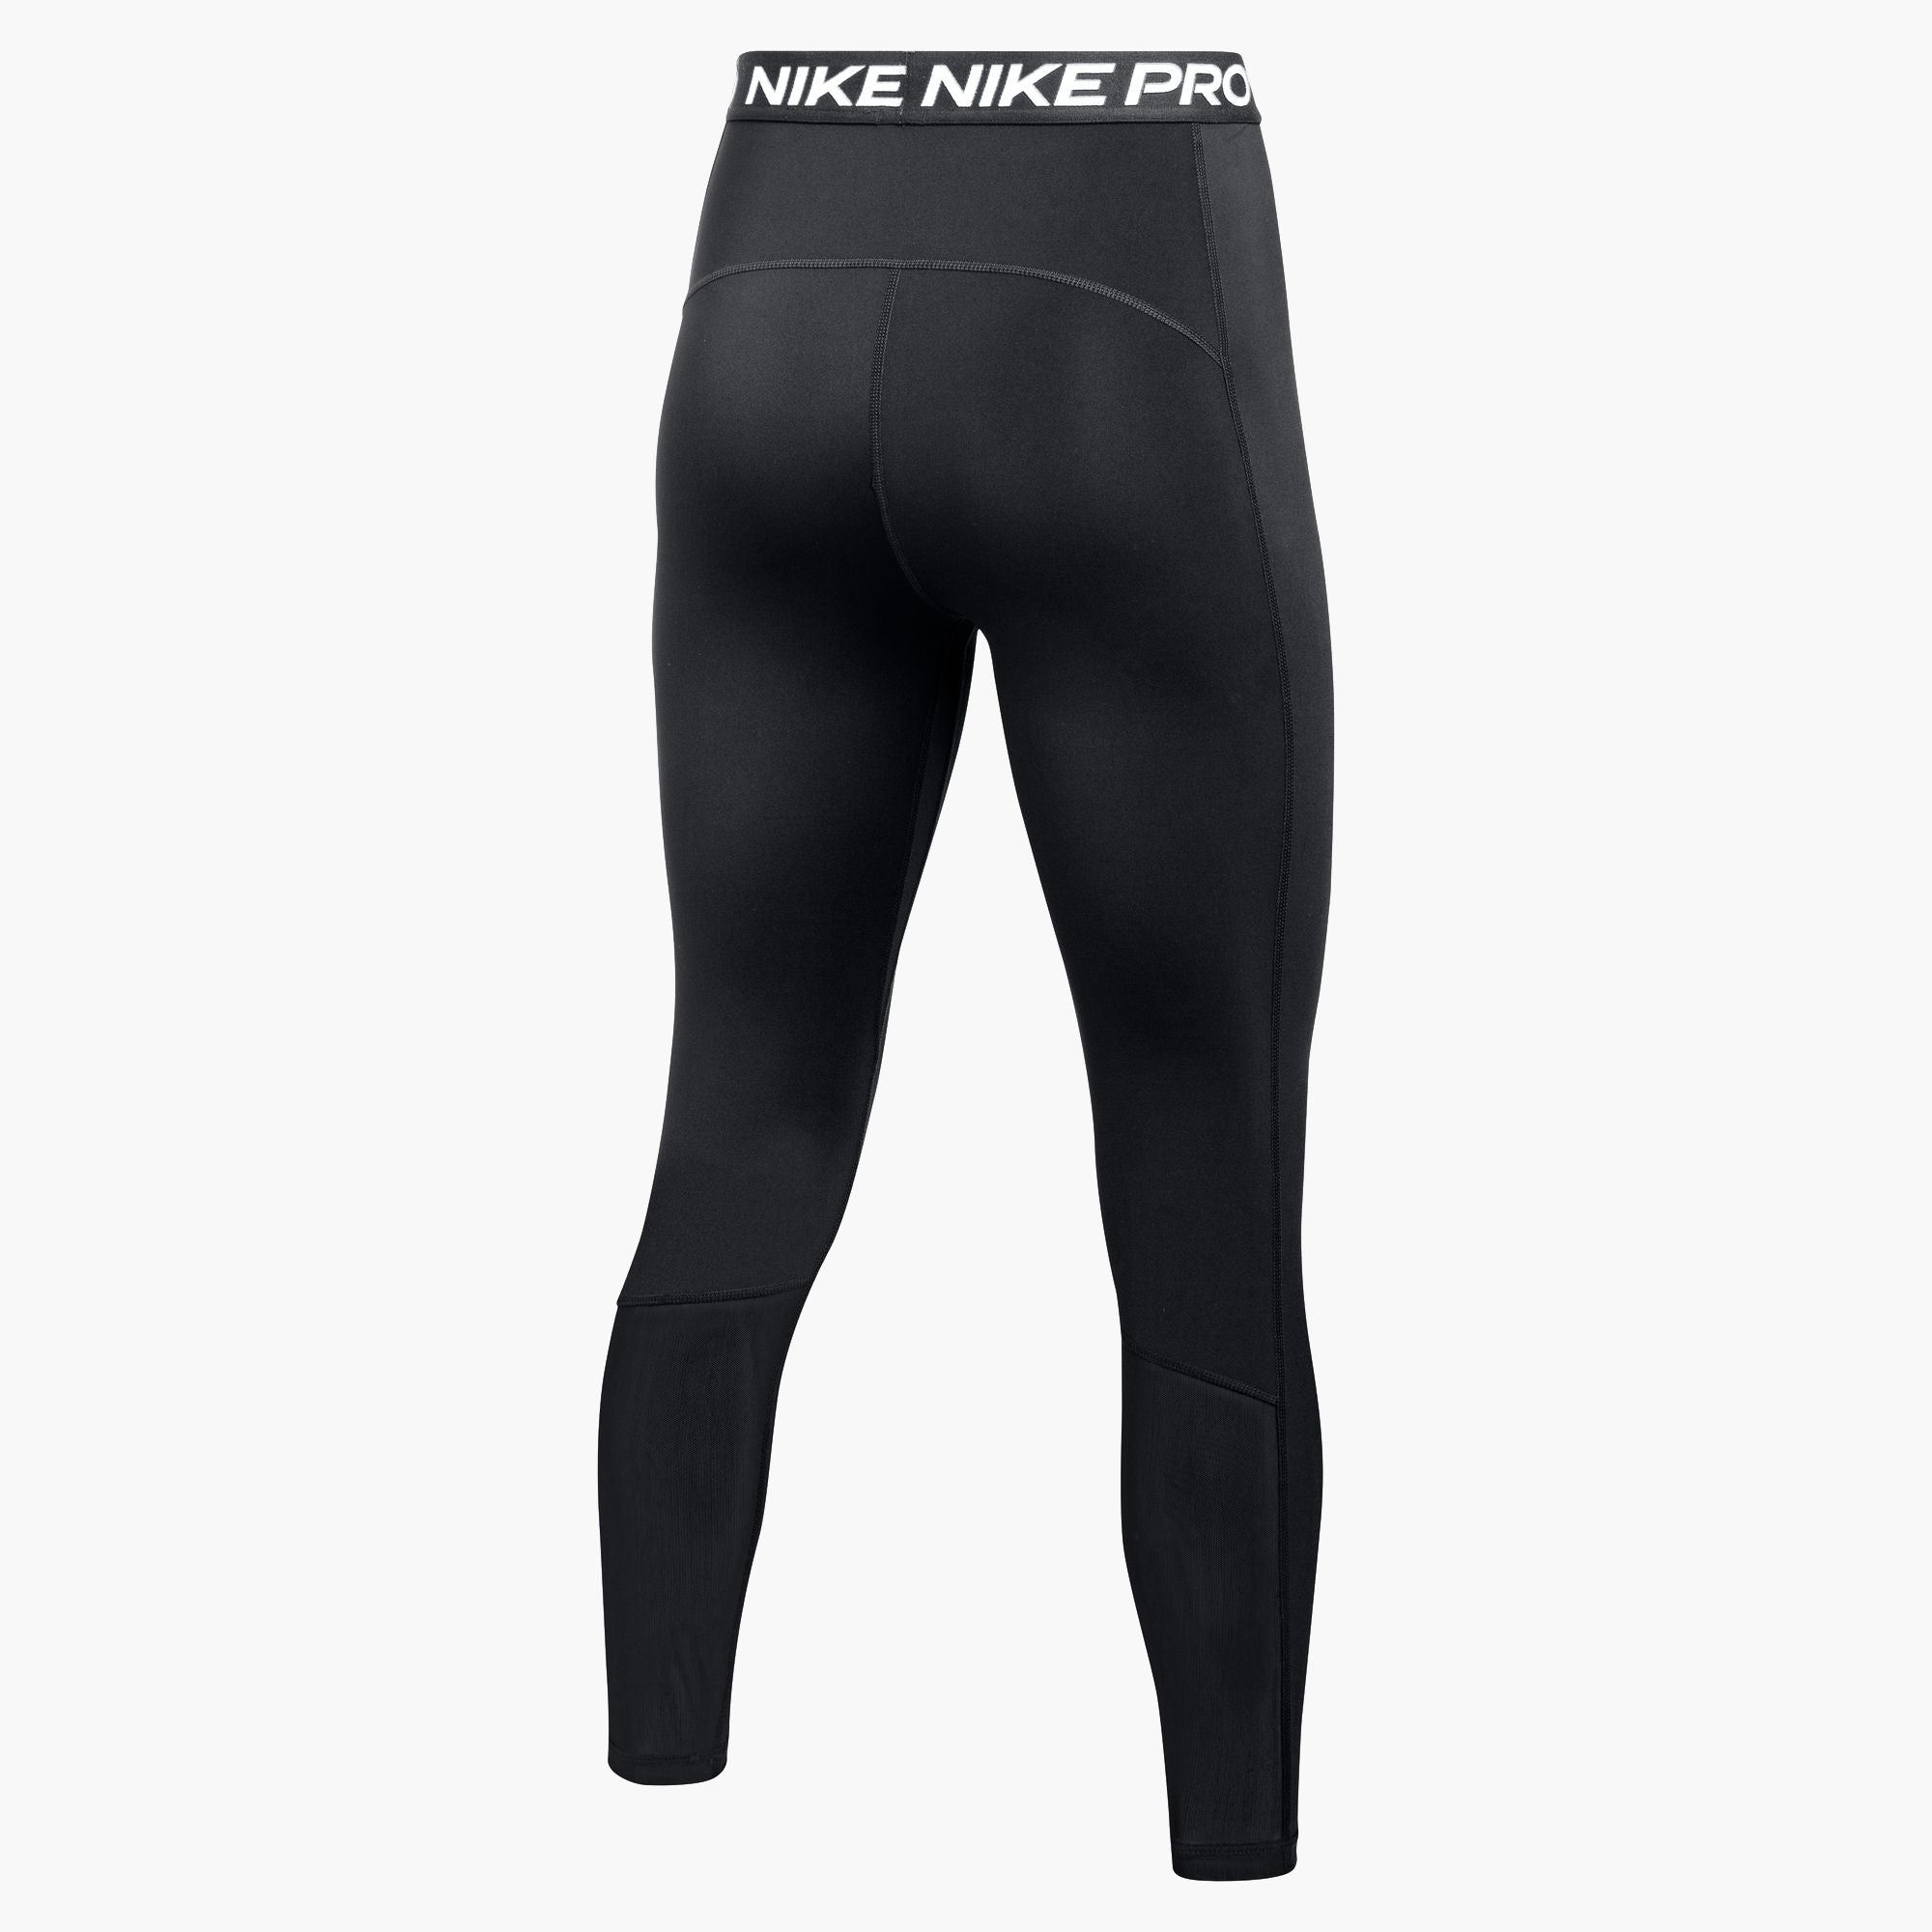 Nike Tights NIKE PRO 365 with mesh in black